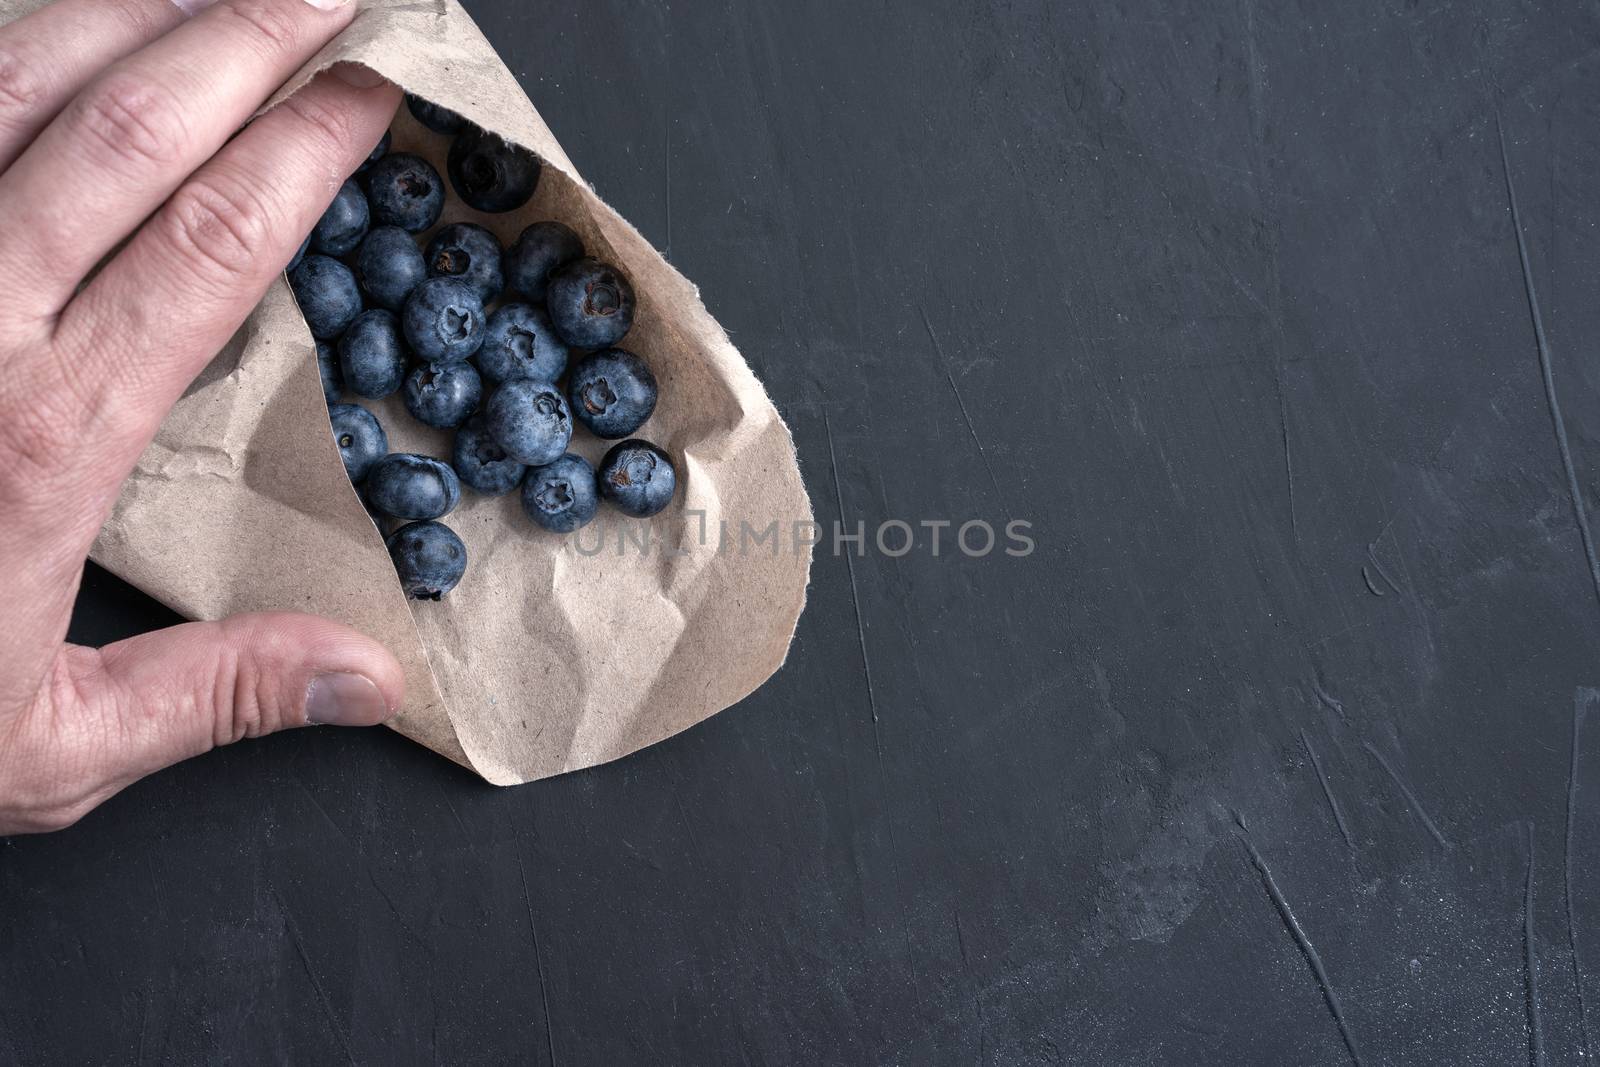 Blueberry antioxidant organic superfood in a paper packaging concept for healthy eating and nutrition by andreonegin